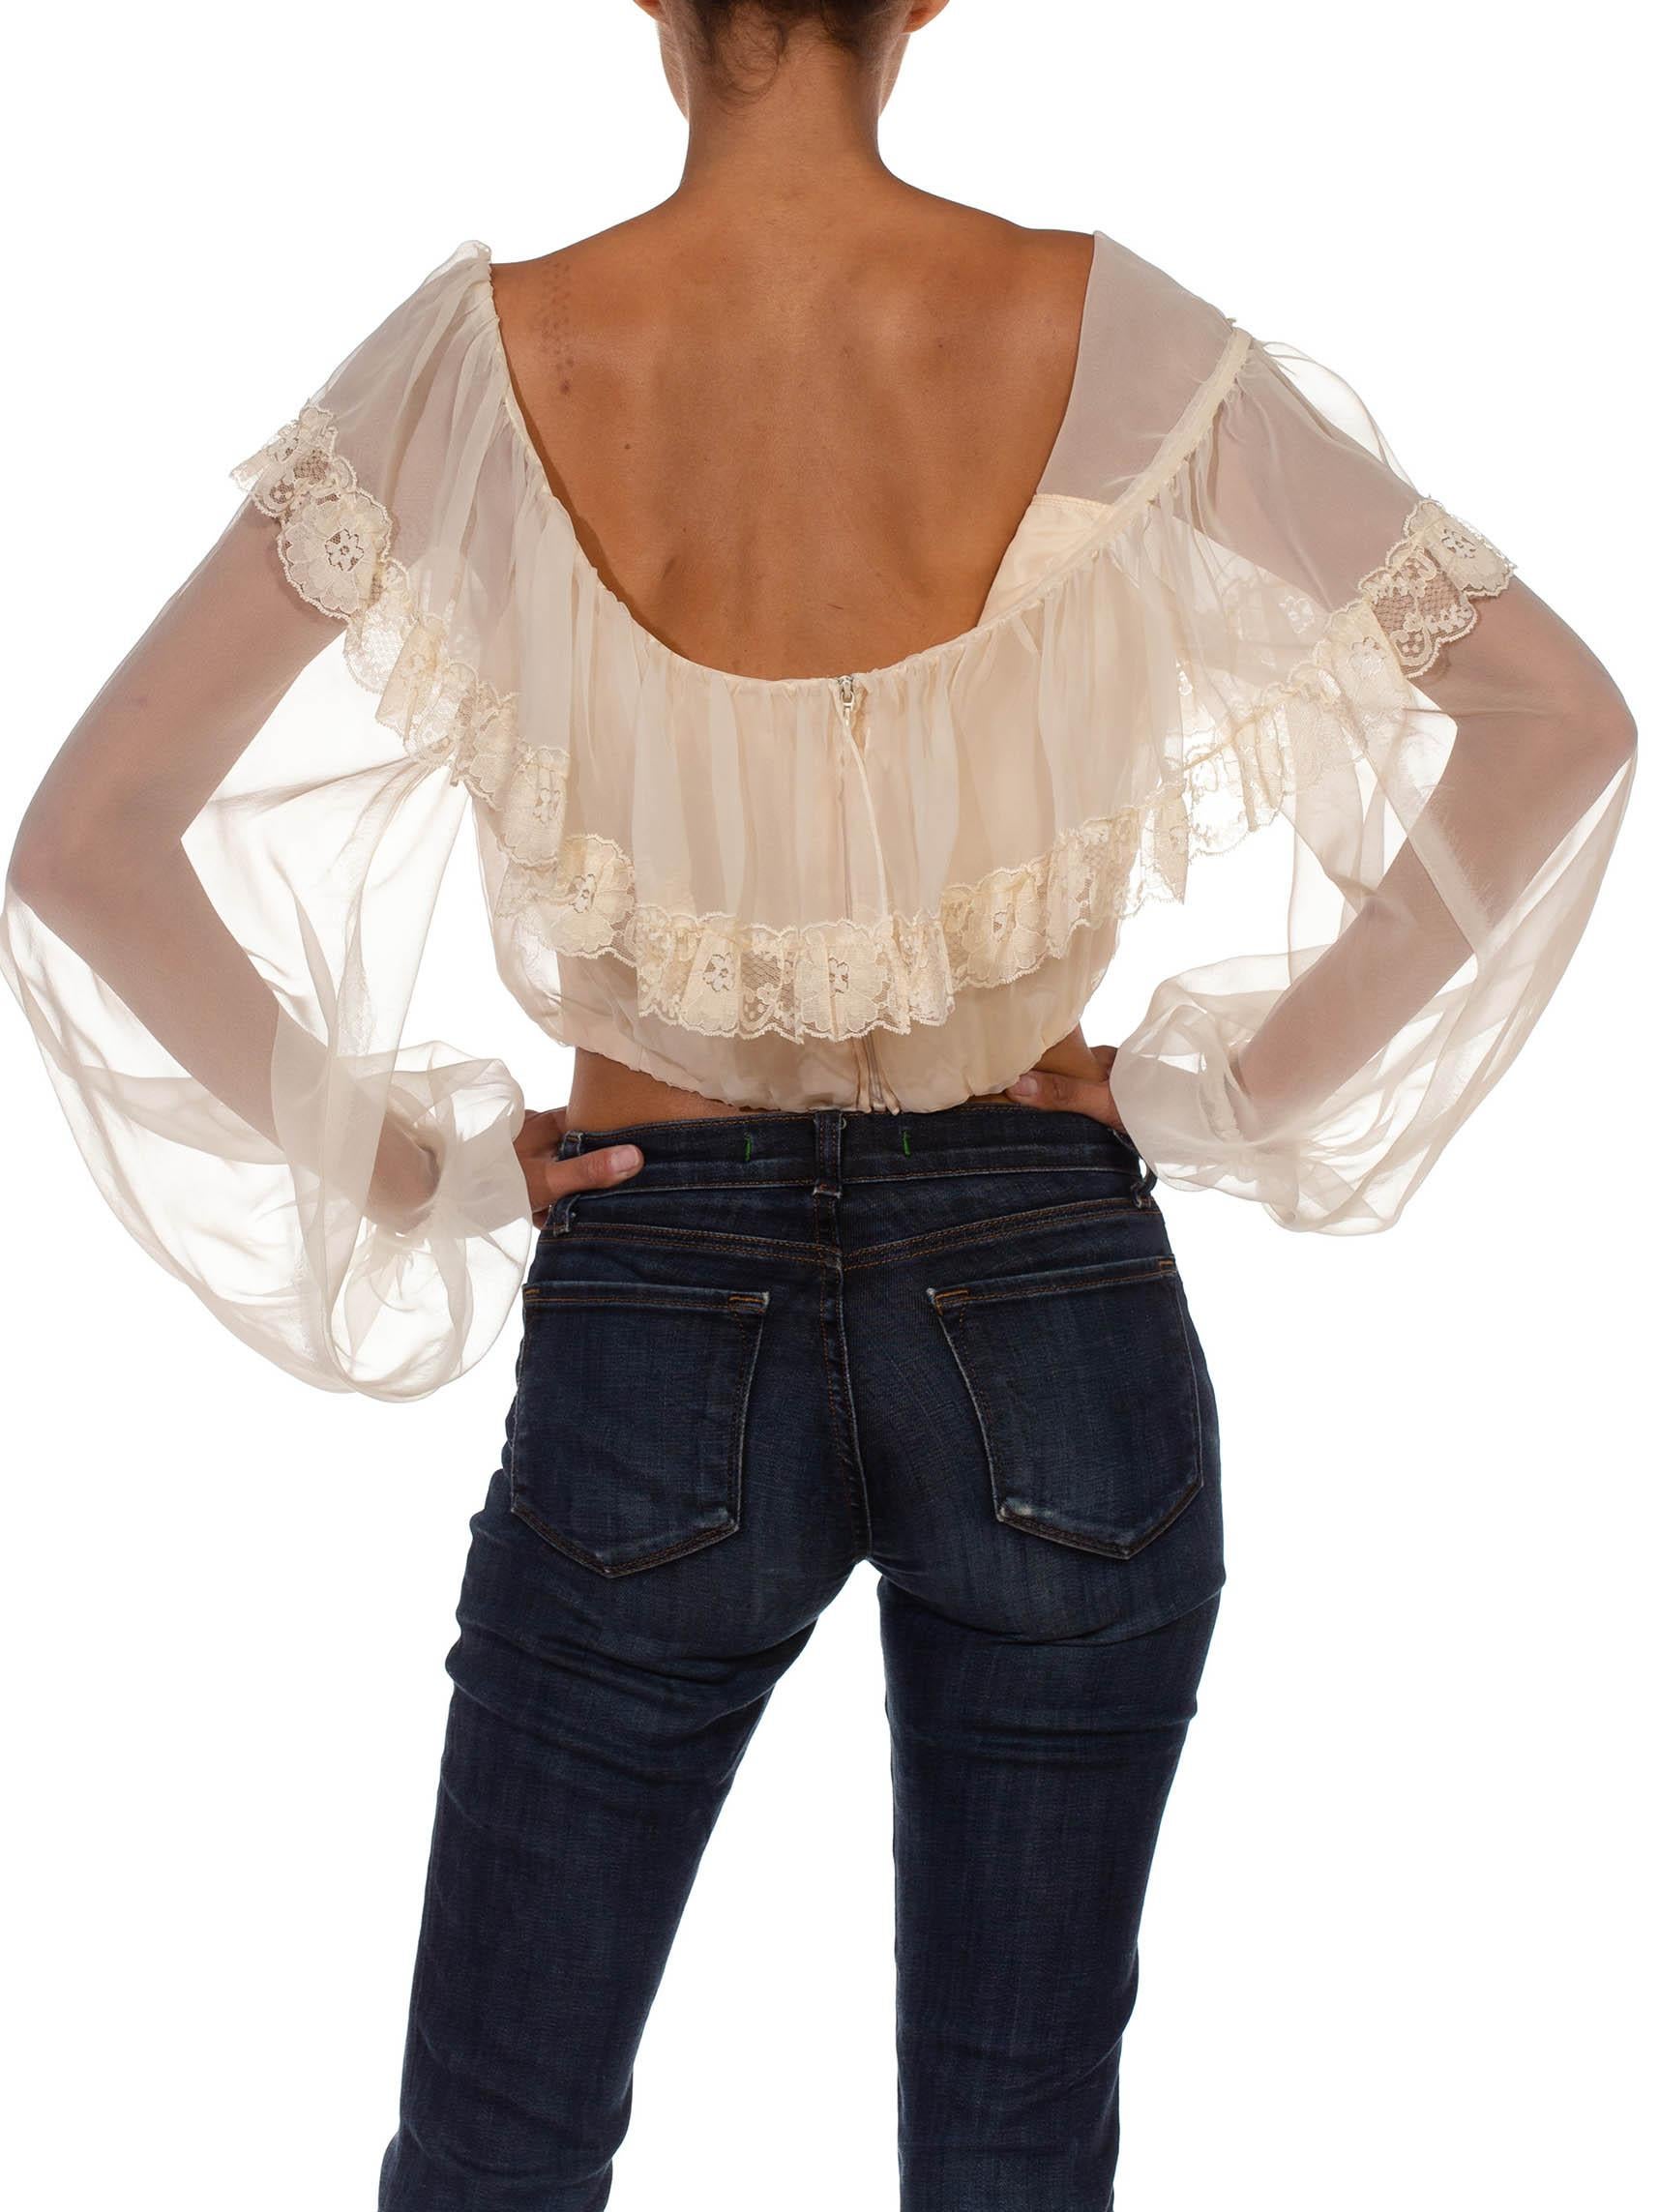 White 1970S Cream Polyester Chiffon Caplet With Lace Trimmings Crop Top For Sale